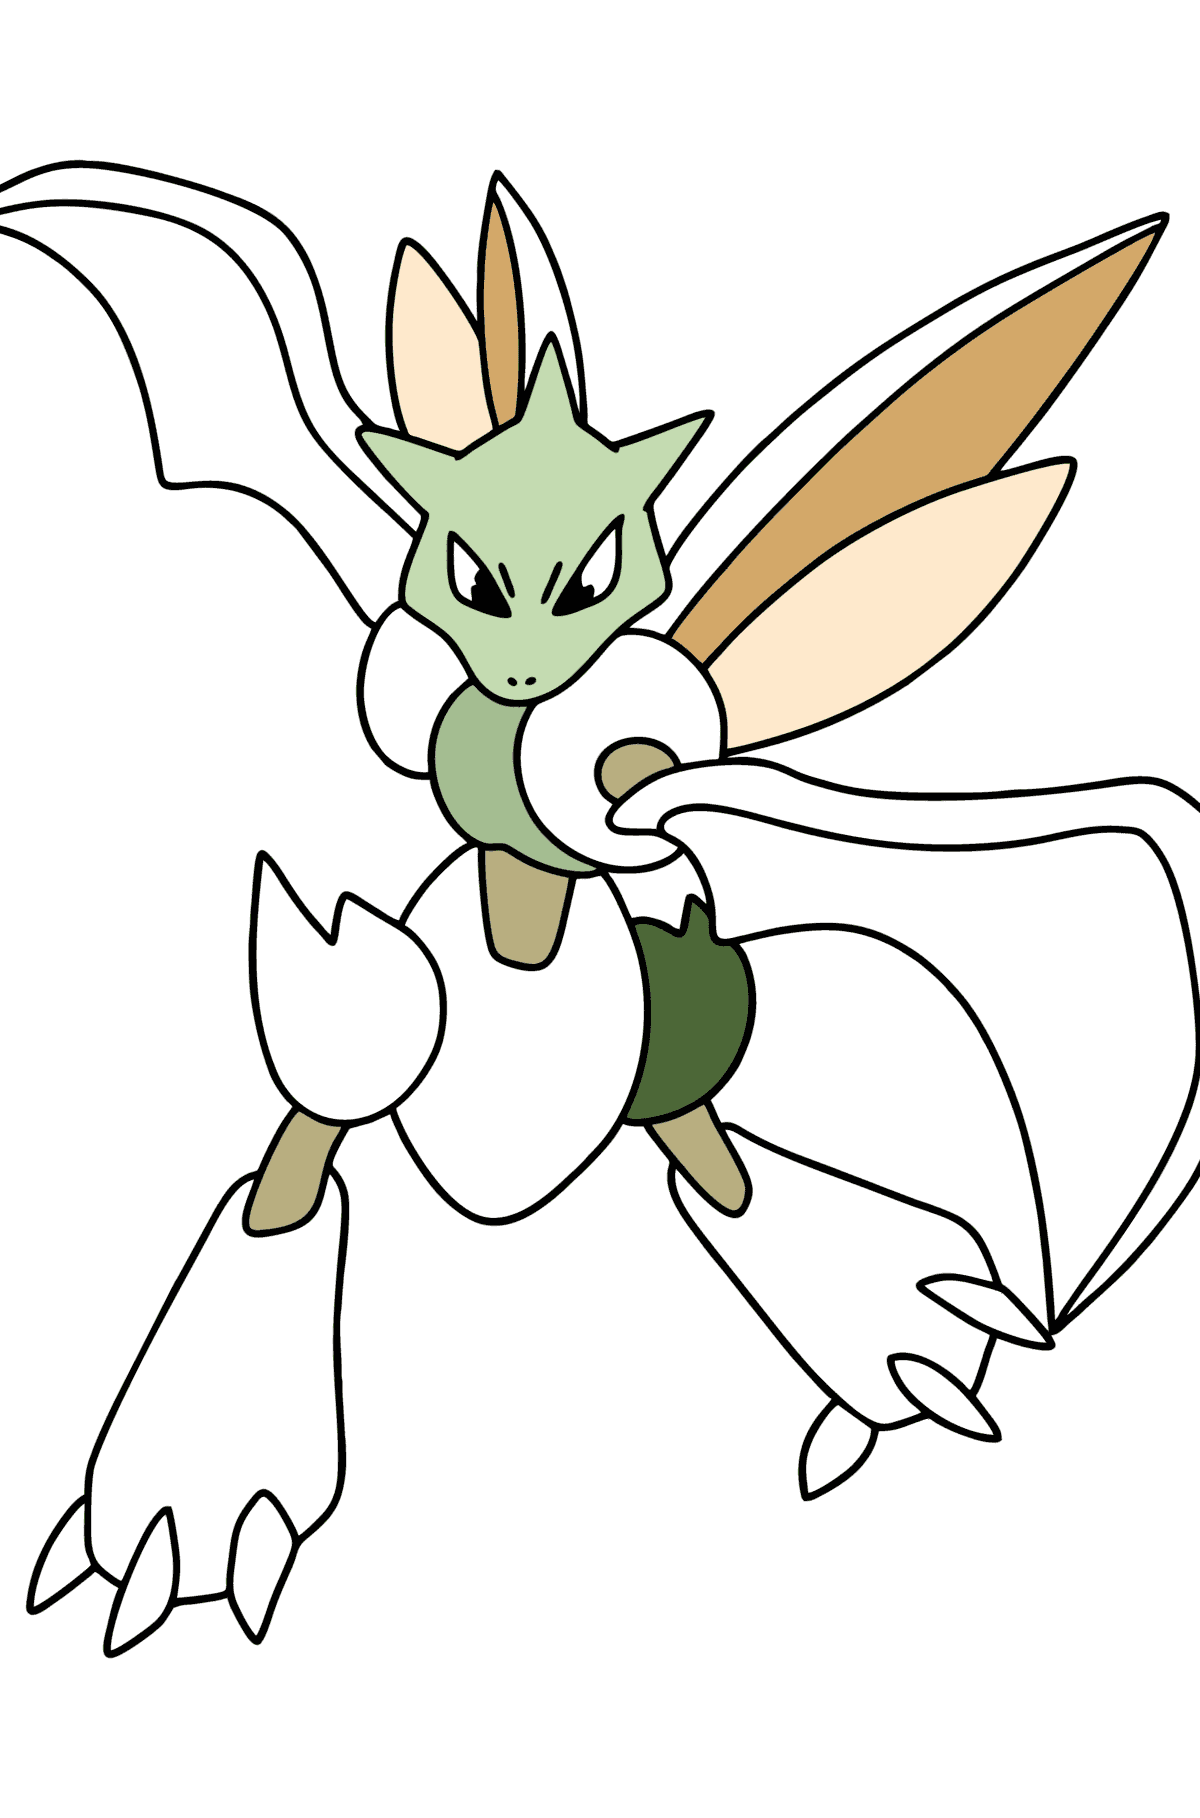 Coloring page Pokemon Go Scyther - Coloring Pages for Kids